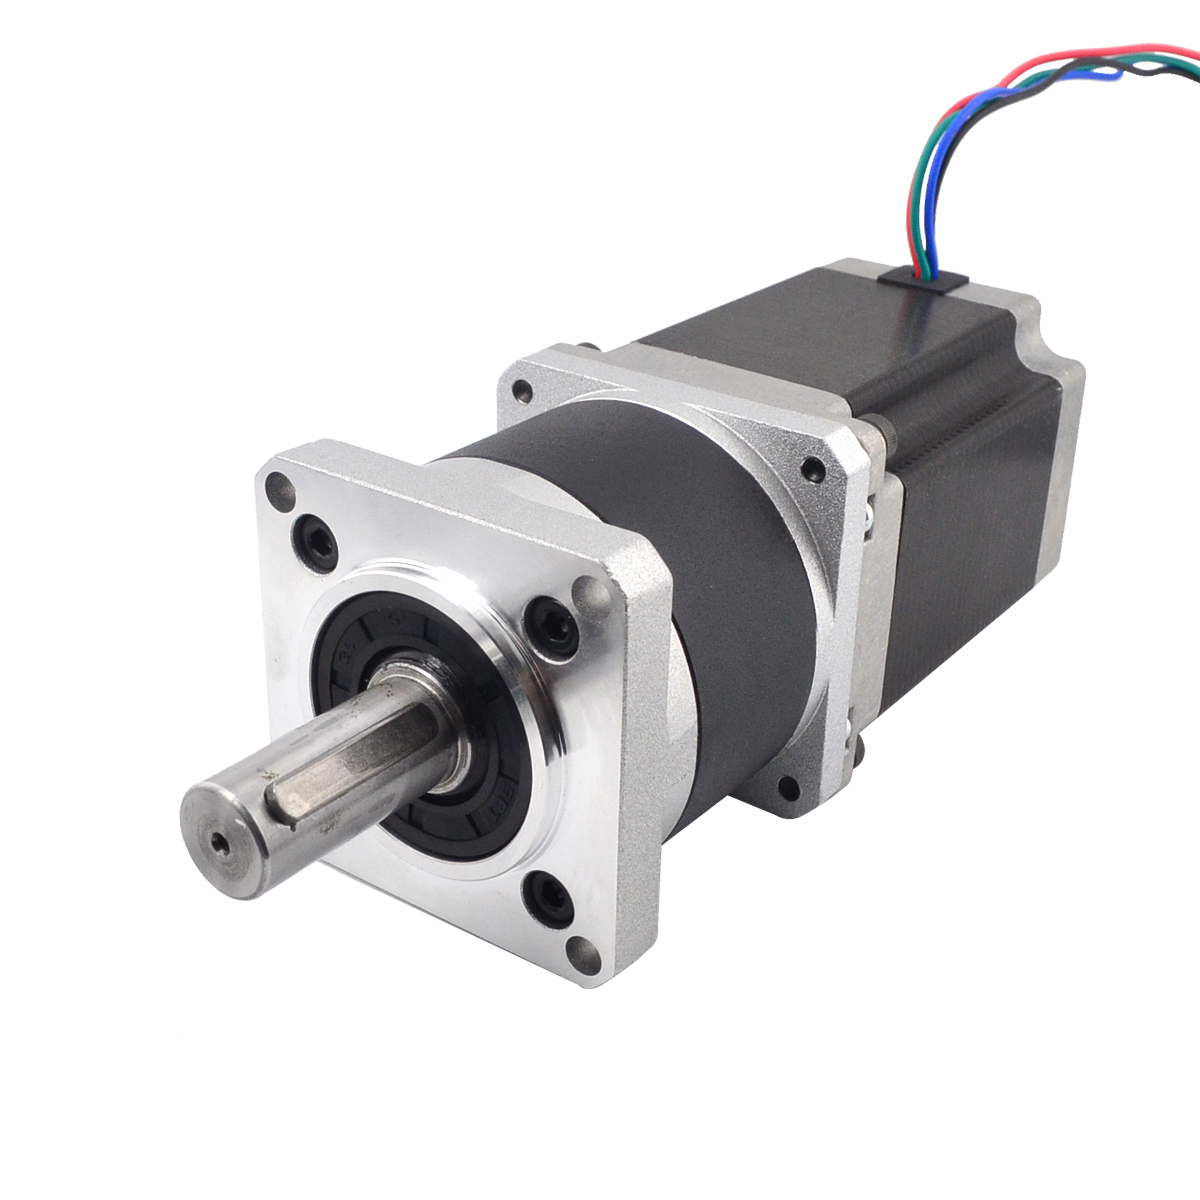 90NM Output Nema23 Stepper Motor L76mm 3A 50:1 Planetary Speed Reducer Gearbox 